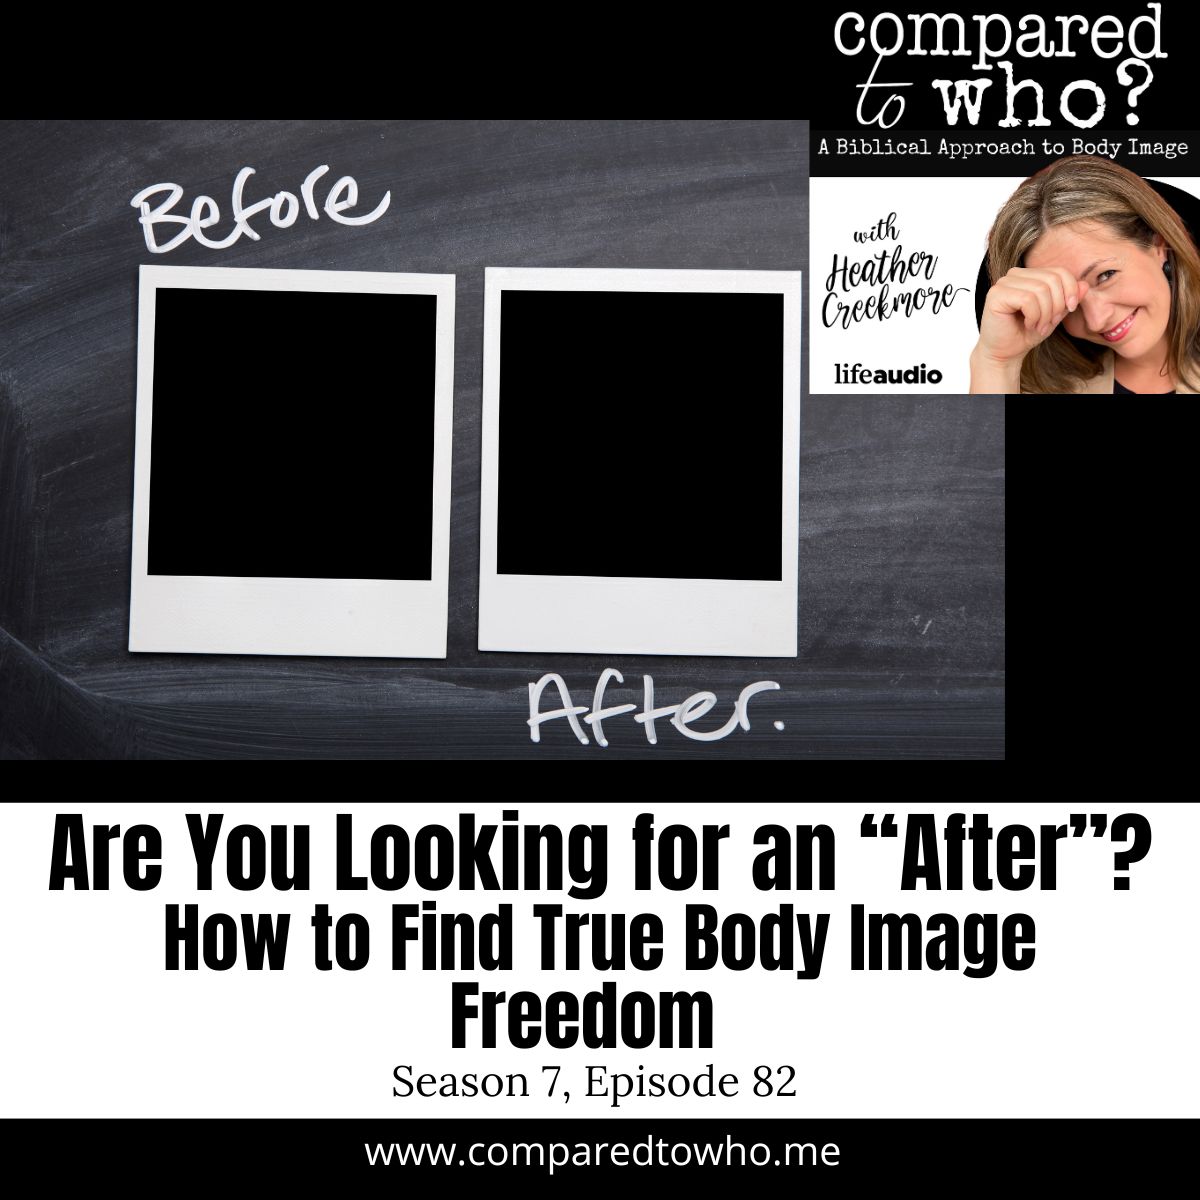 Are You Looking for an “After” Story? How to Find True Body Image Freedom